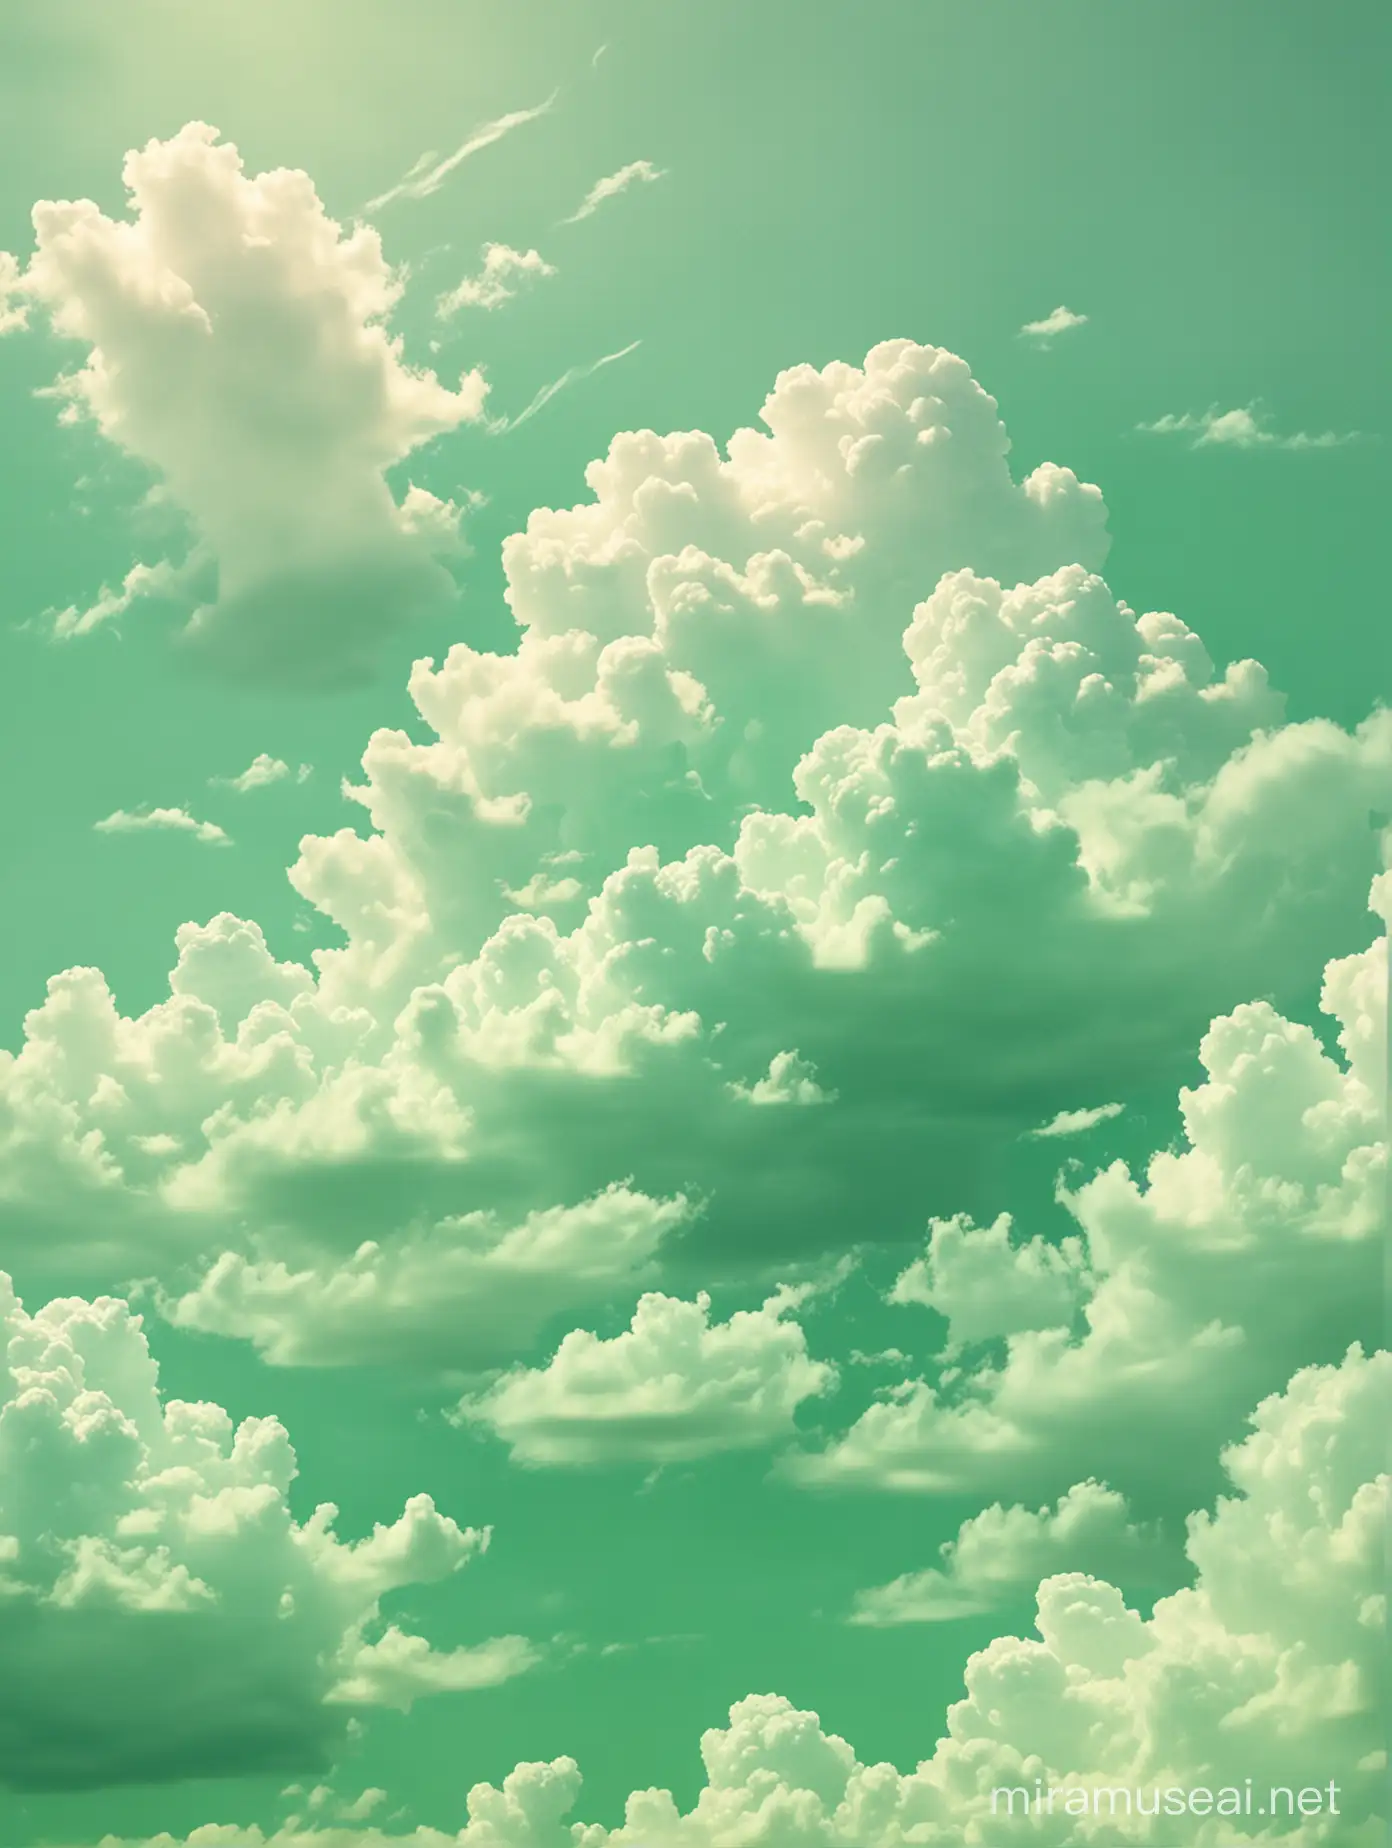 Surreal Pastel Green Landscape with Ethereal Clouds